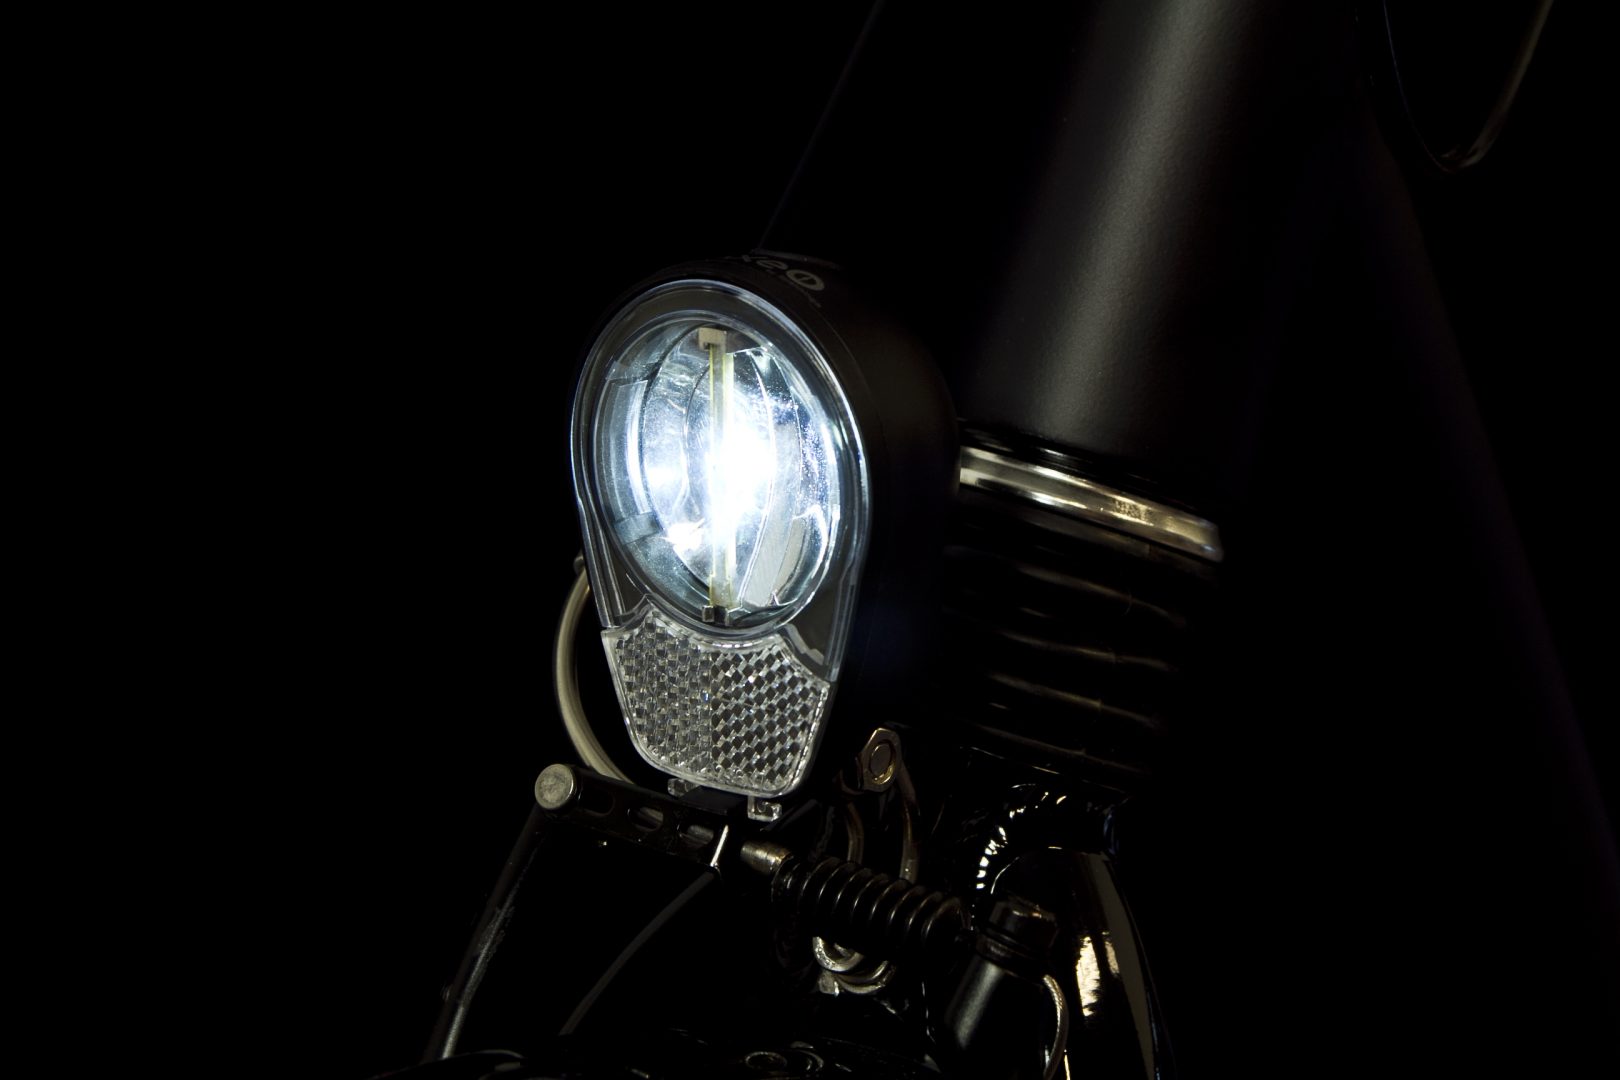 Roxeo headlamp on front fork